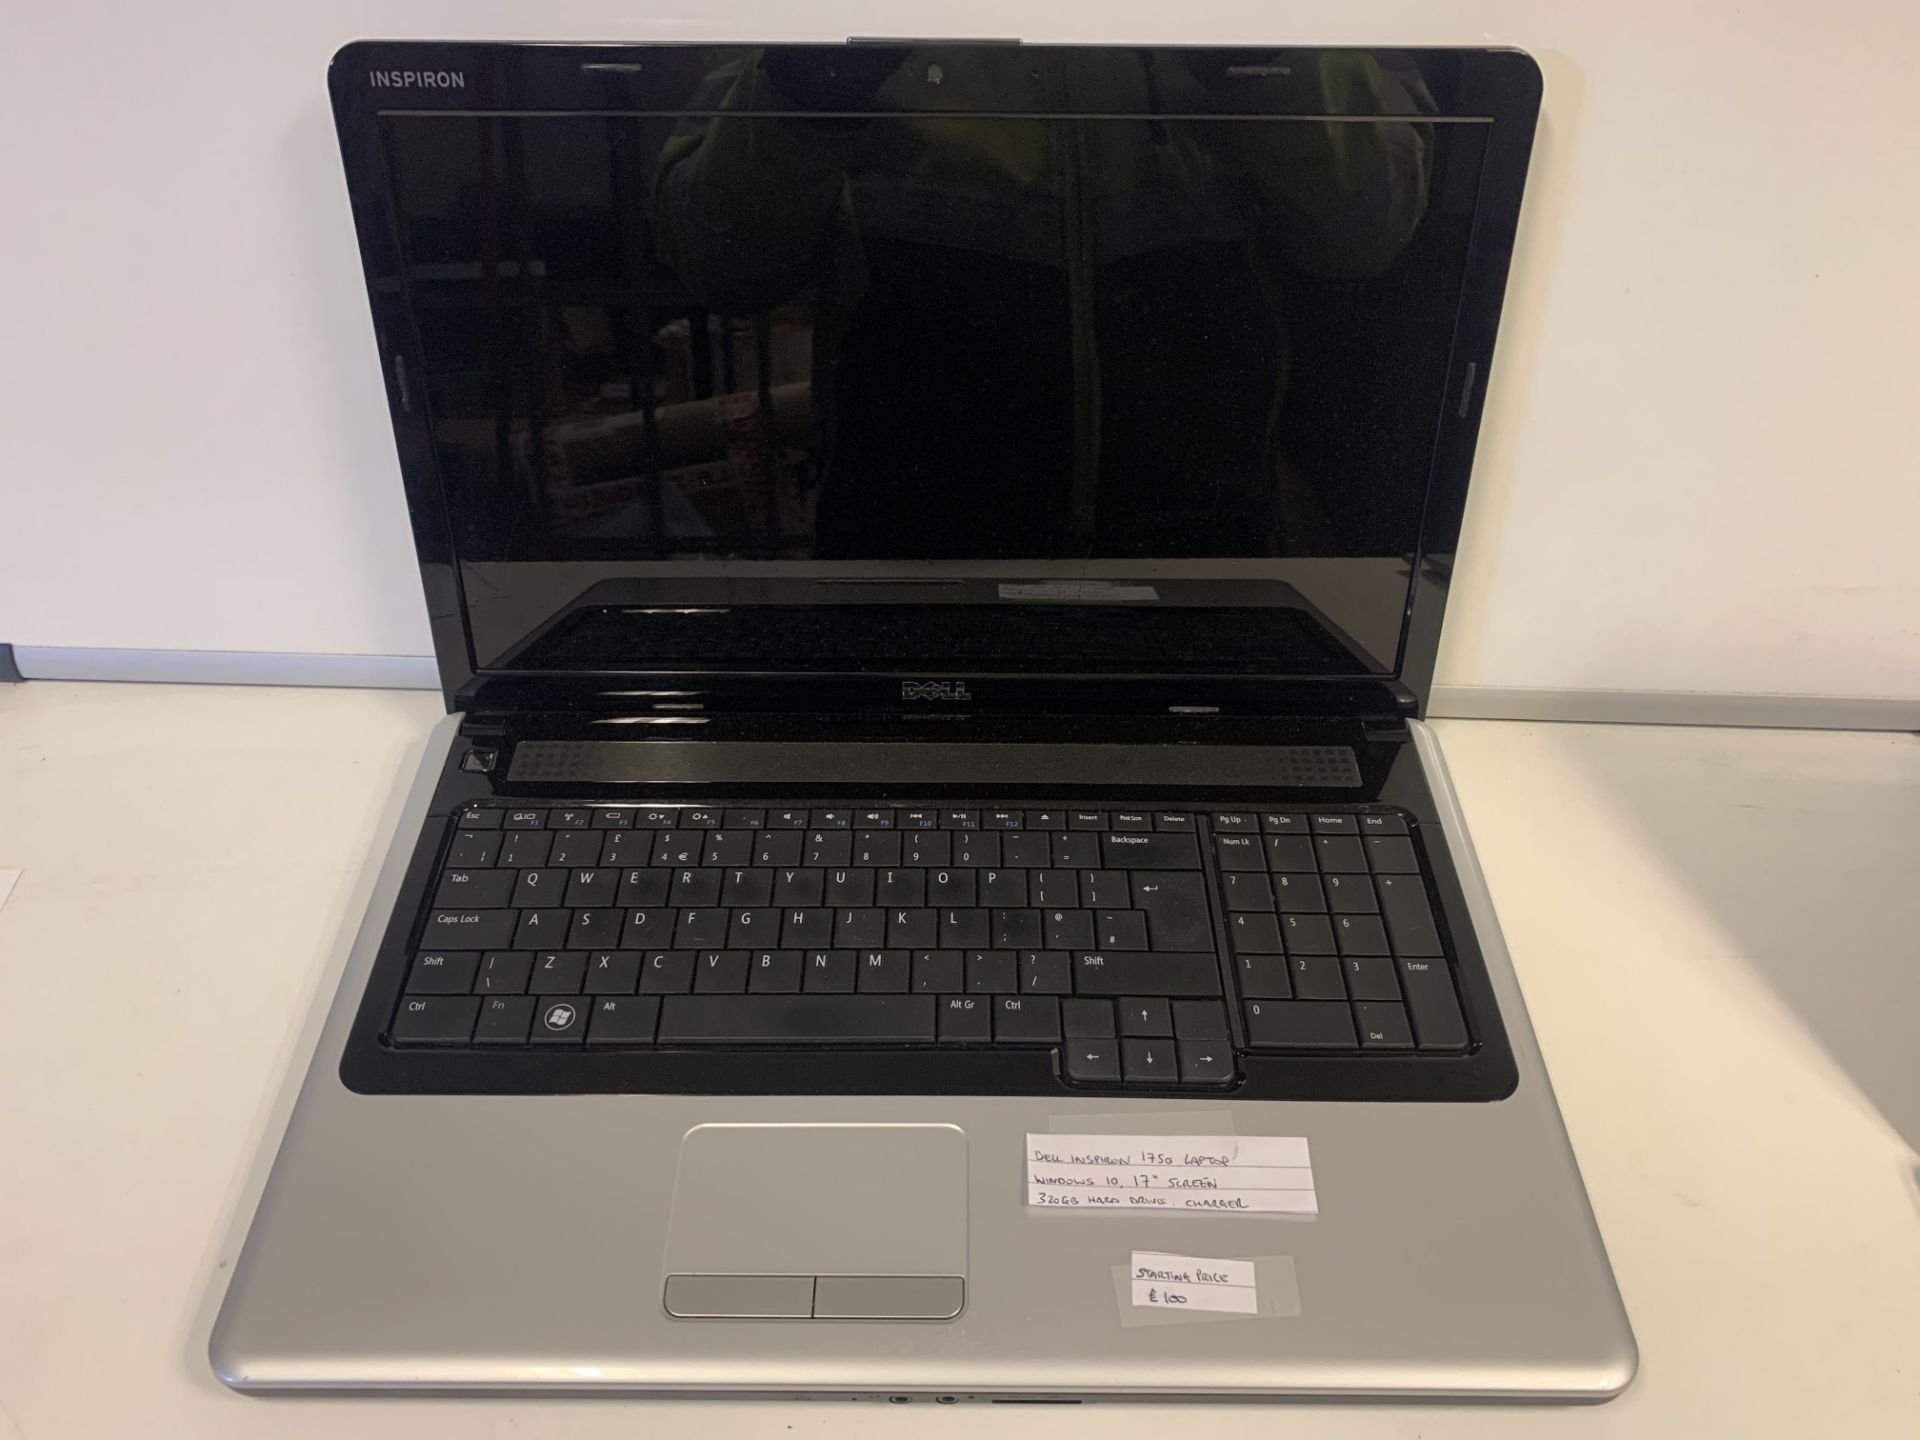 DELL INSPIRON 1750 LAPTOP, WINDOWS 10, 17 INCH SCREEN, 320GB HARD DRIVE WITH CHARGER